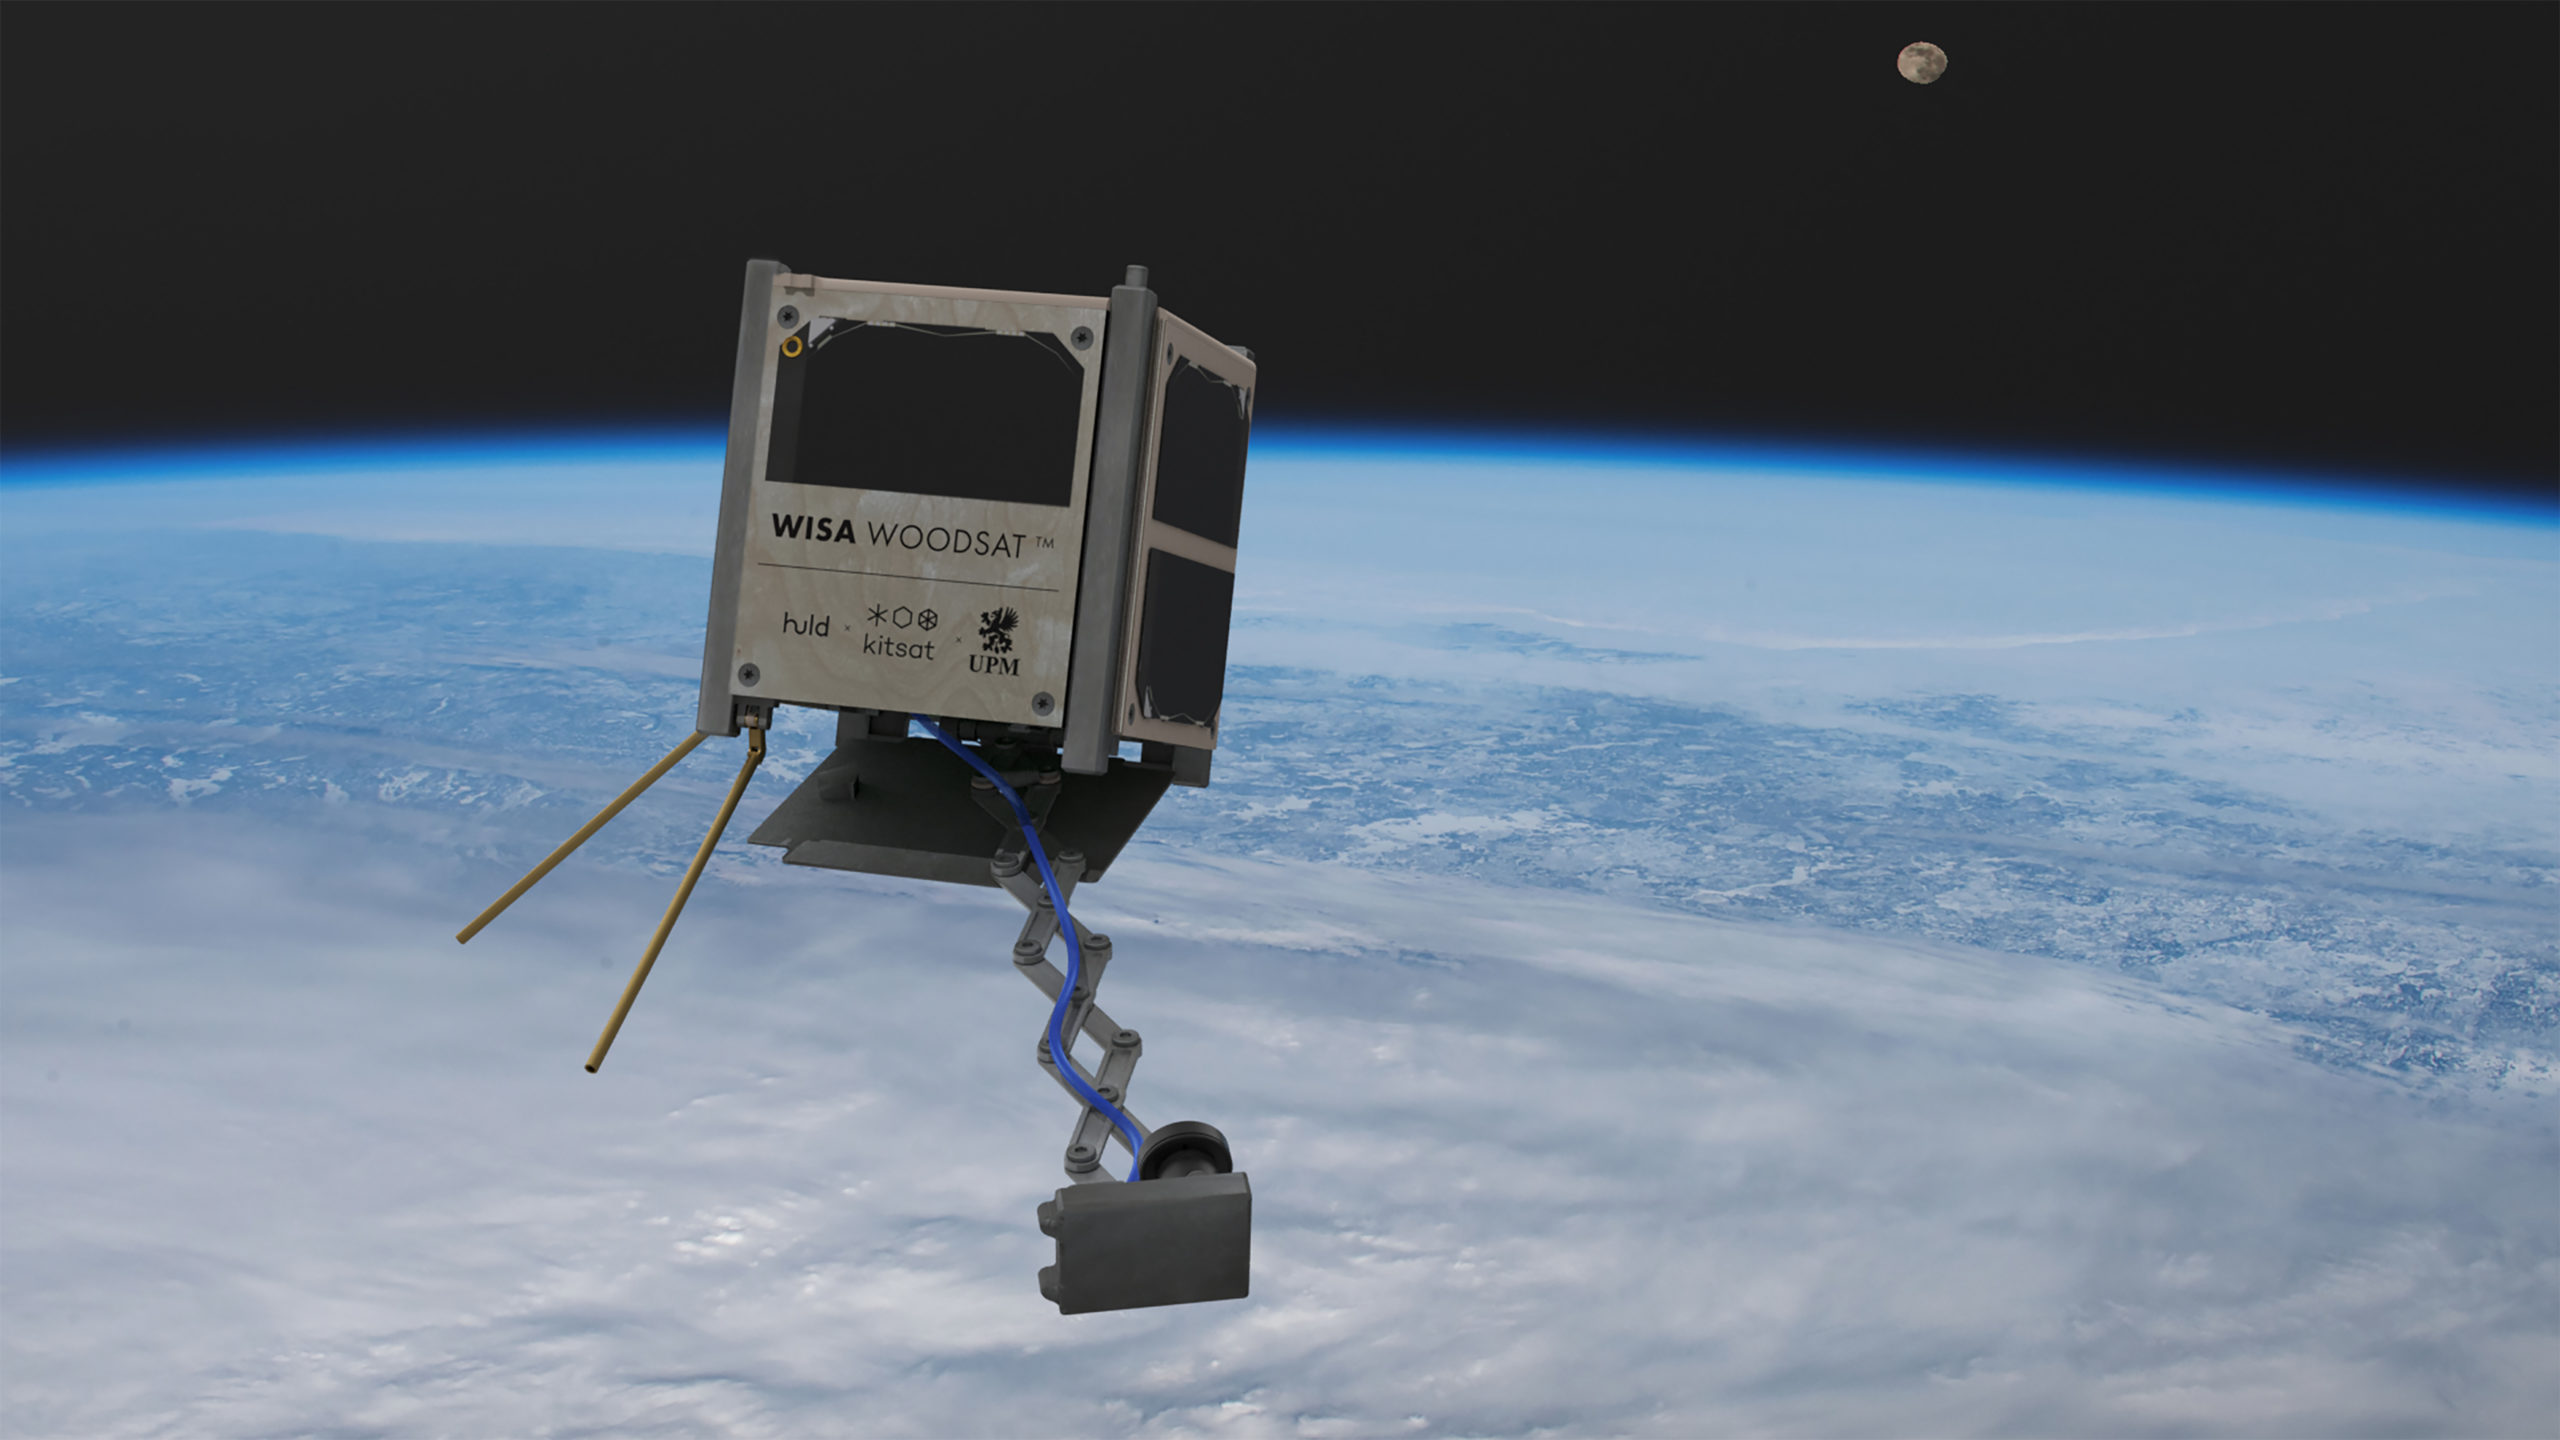 The world's first wooden satellite, WISA Woodsat, will launch to LEO in 2022.